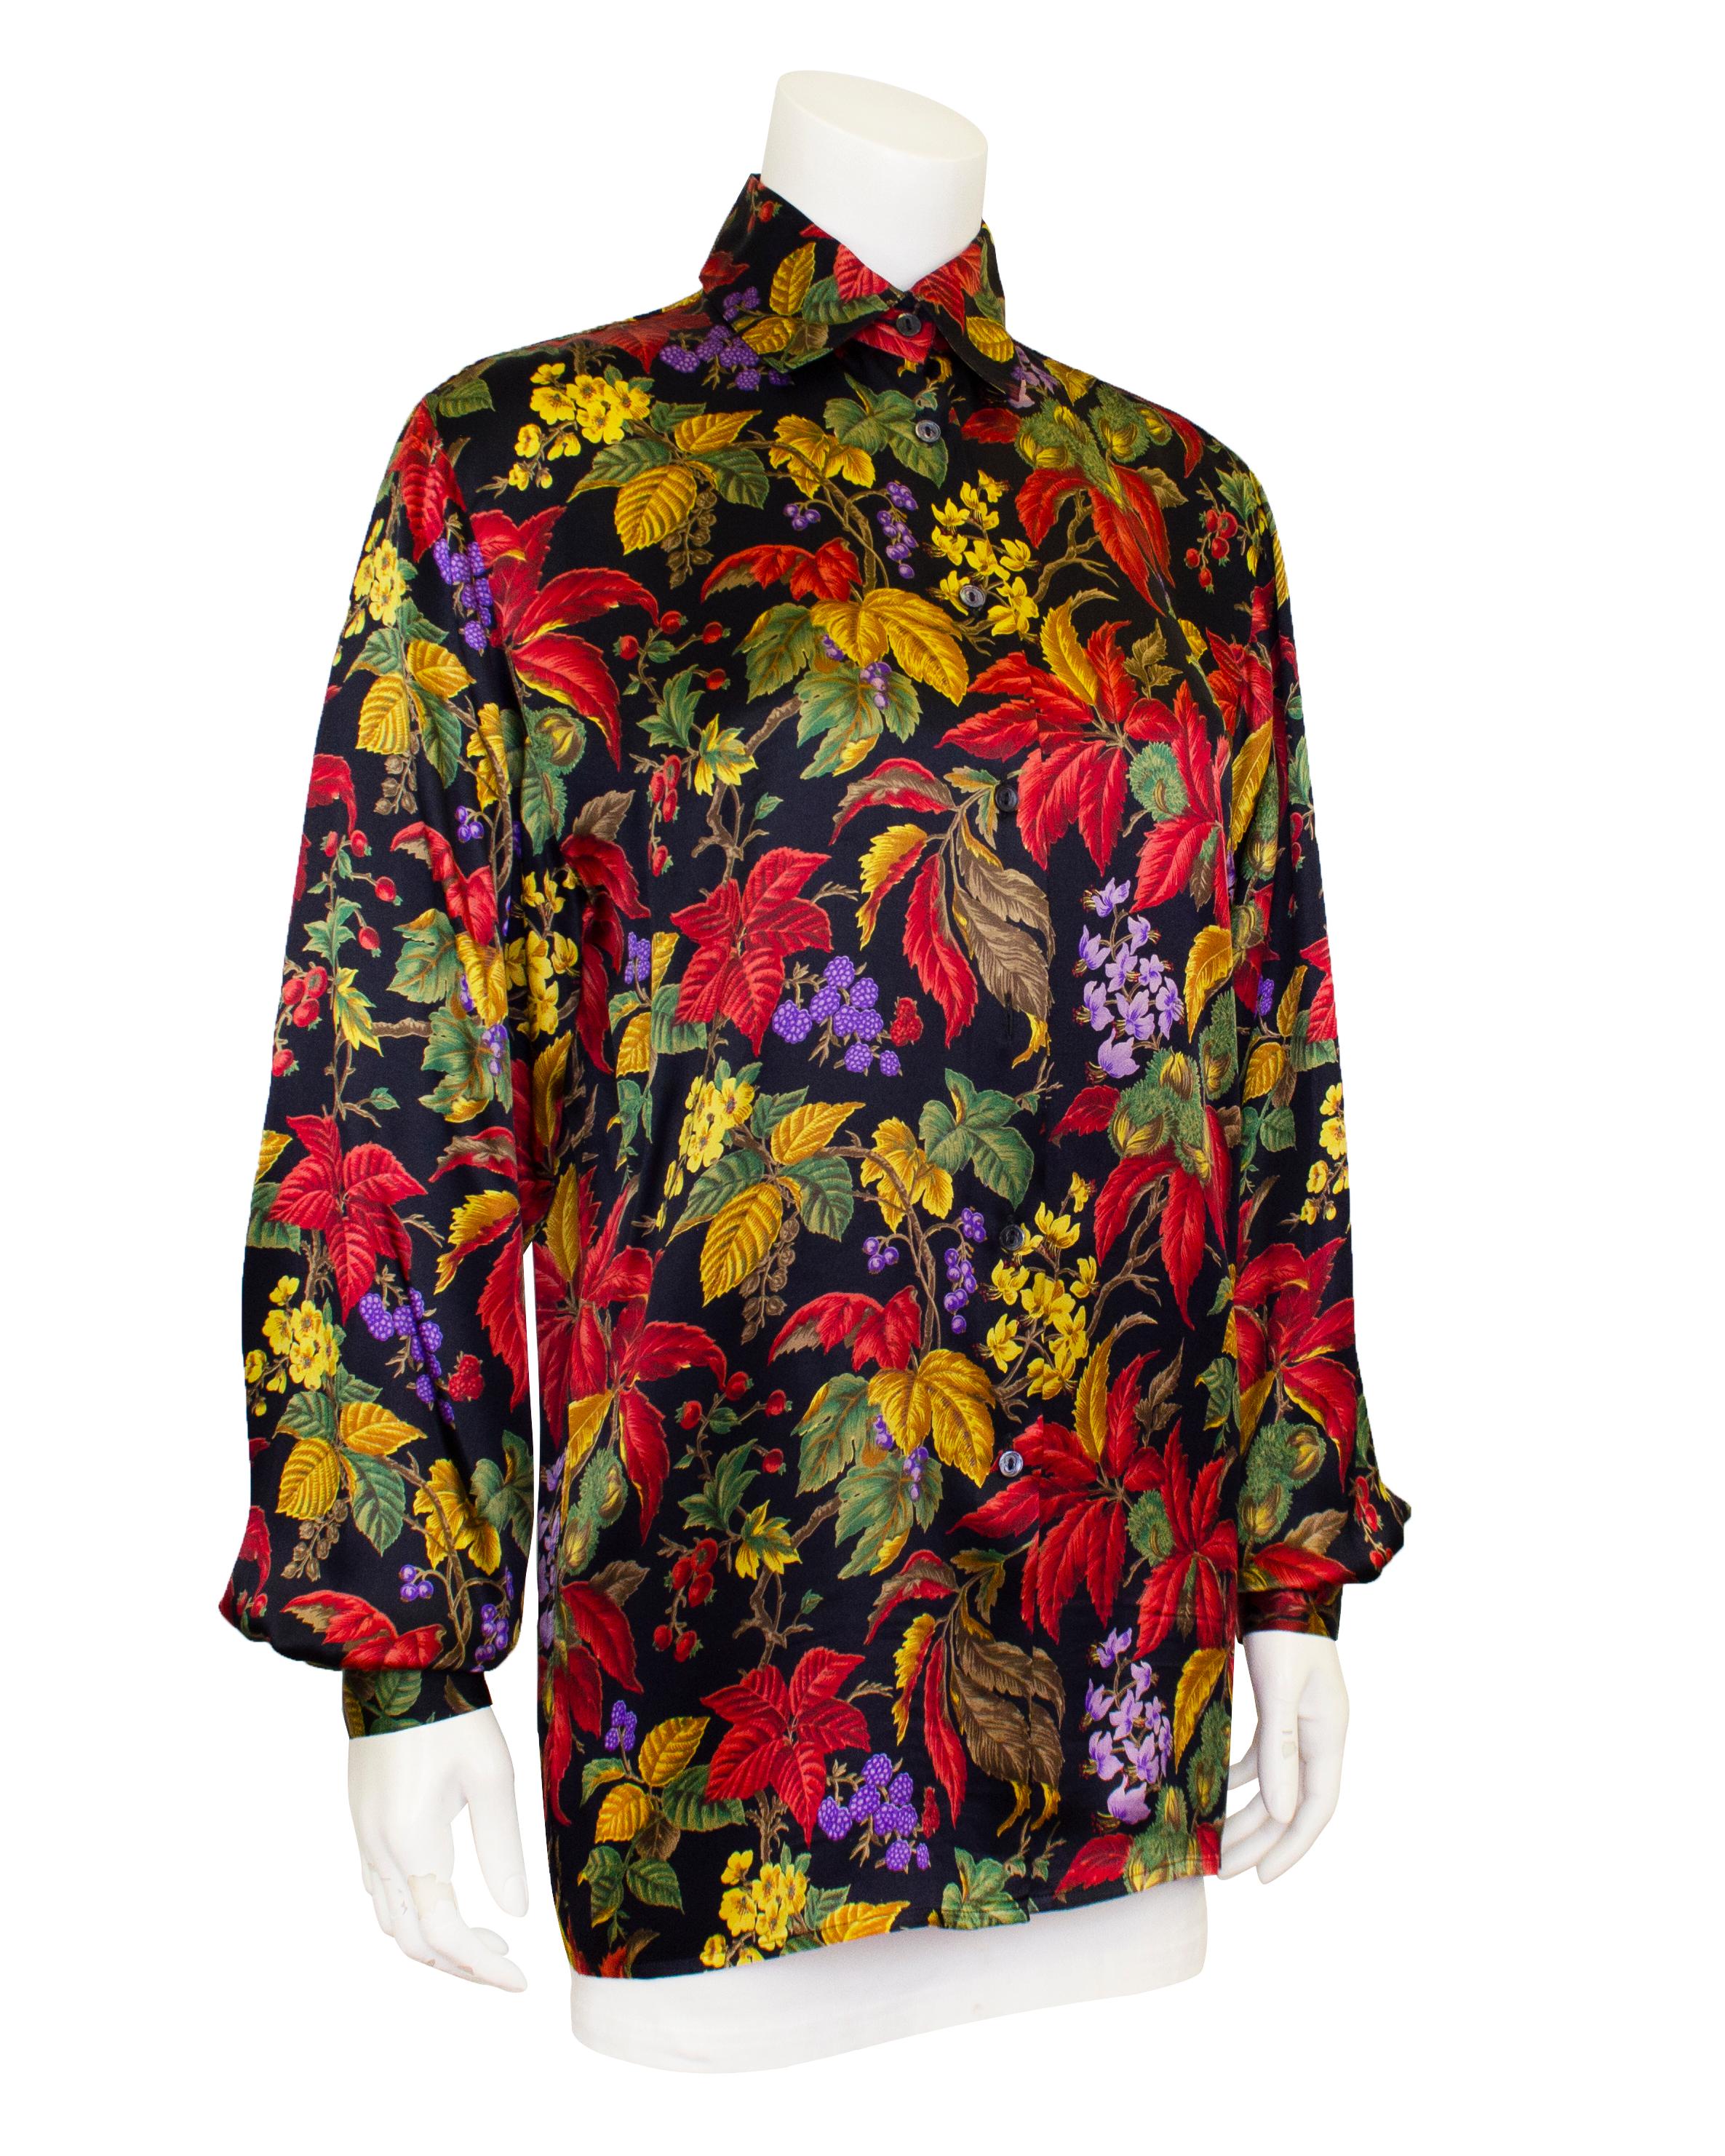 Stunning Gucci printed silk blouse from the 1970s. The all over raspberry bush botanical print features stunning rich shades of yellow, red, green, purple and brown on a black background. The blouse is almost tunic length with oversized bishop